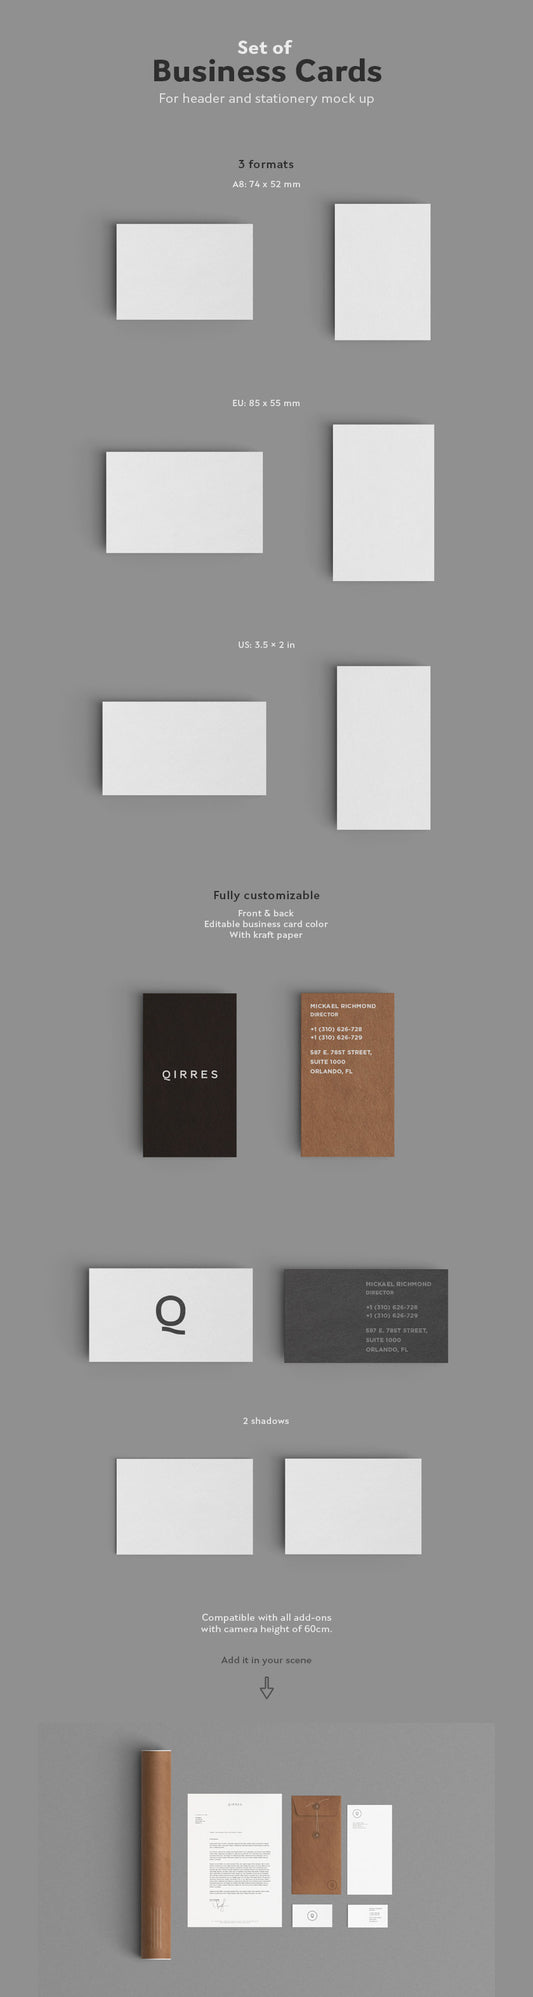 Free White Business Card Mockups in 3mats (A8, EU and US)